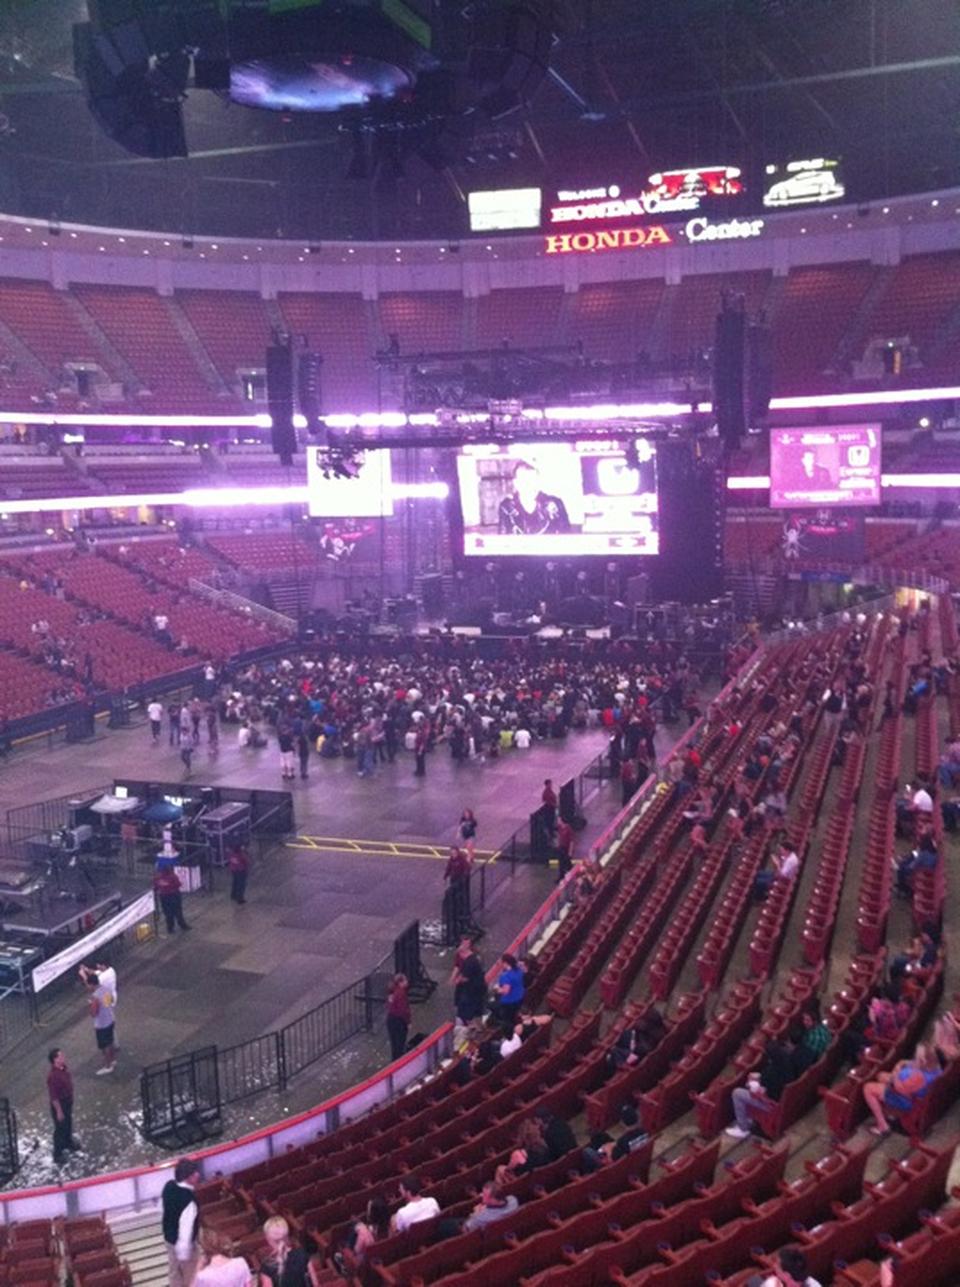 section 324 seat view  for concert - honda center